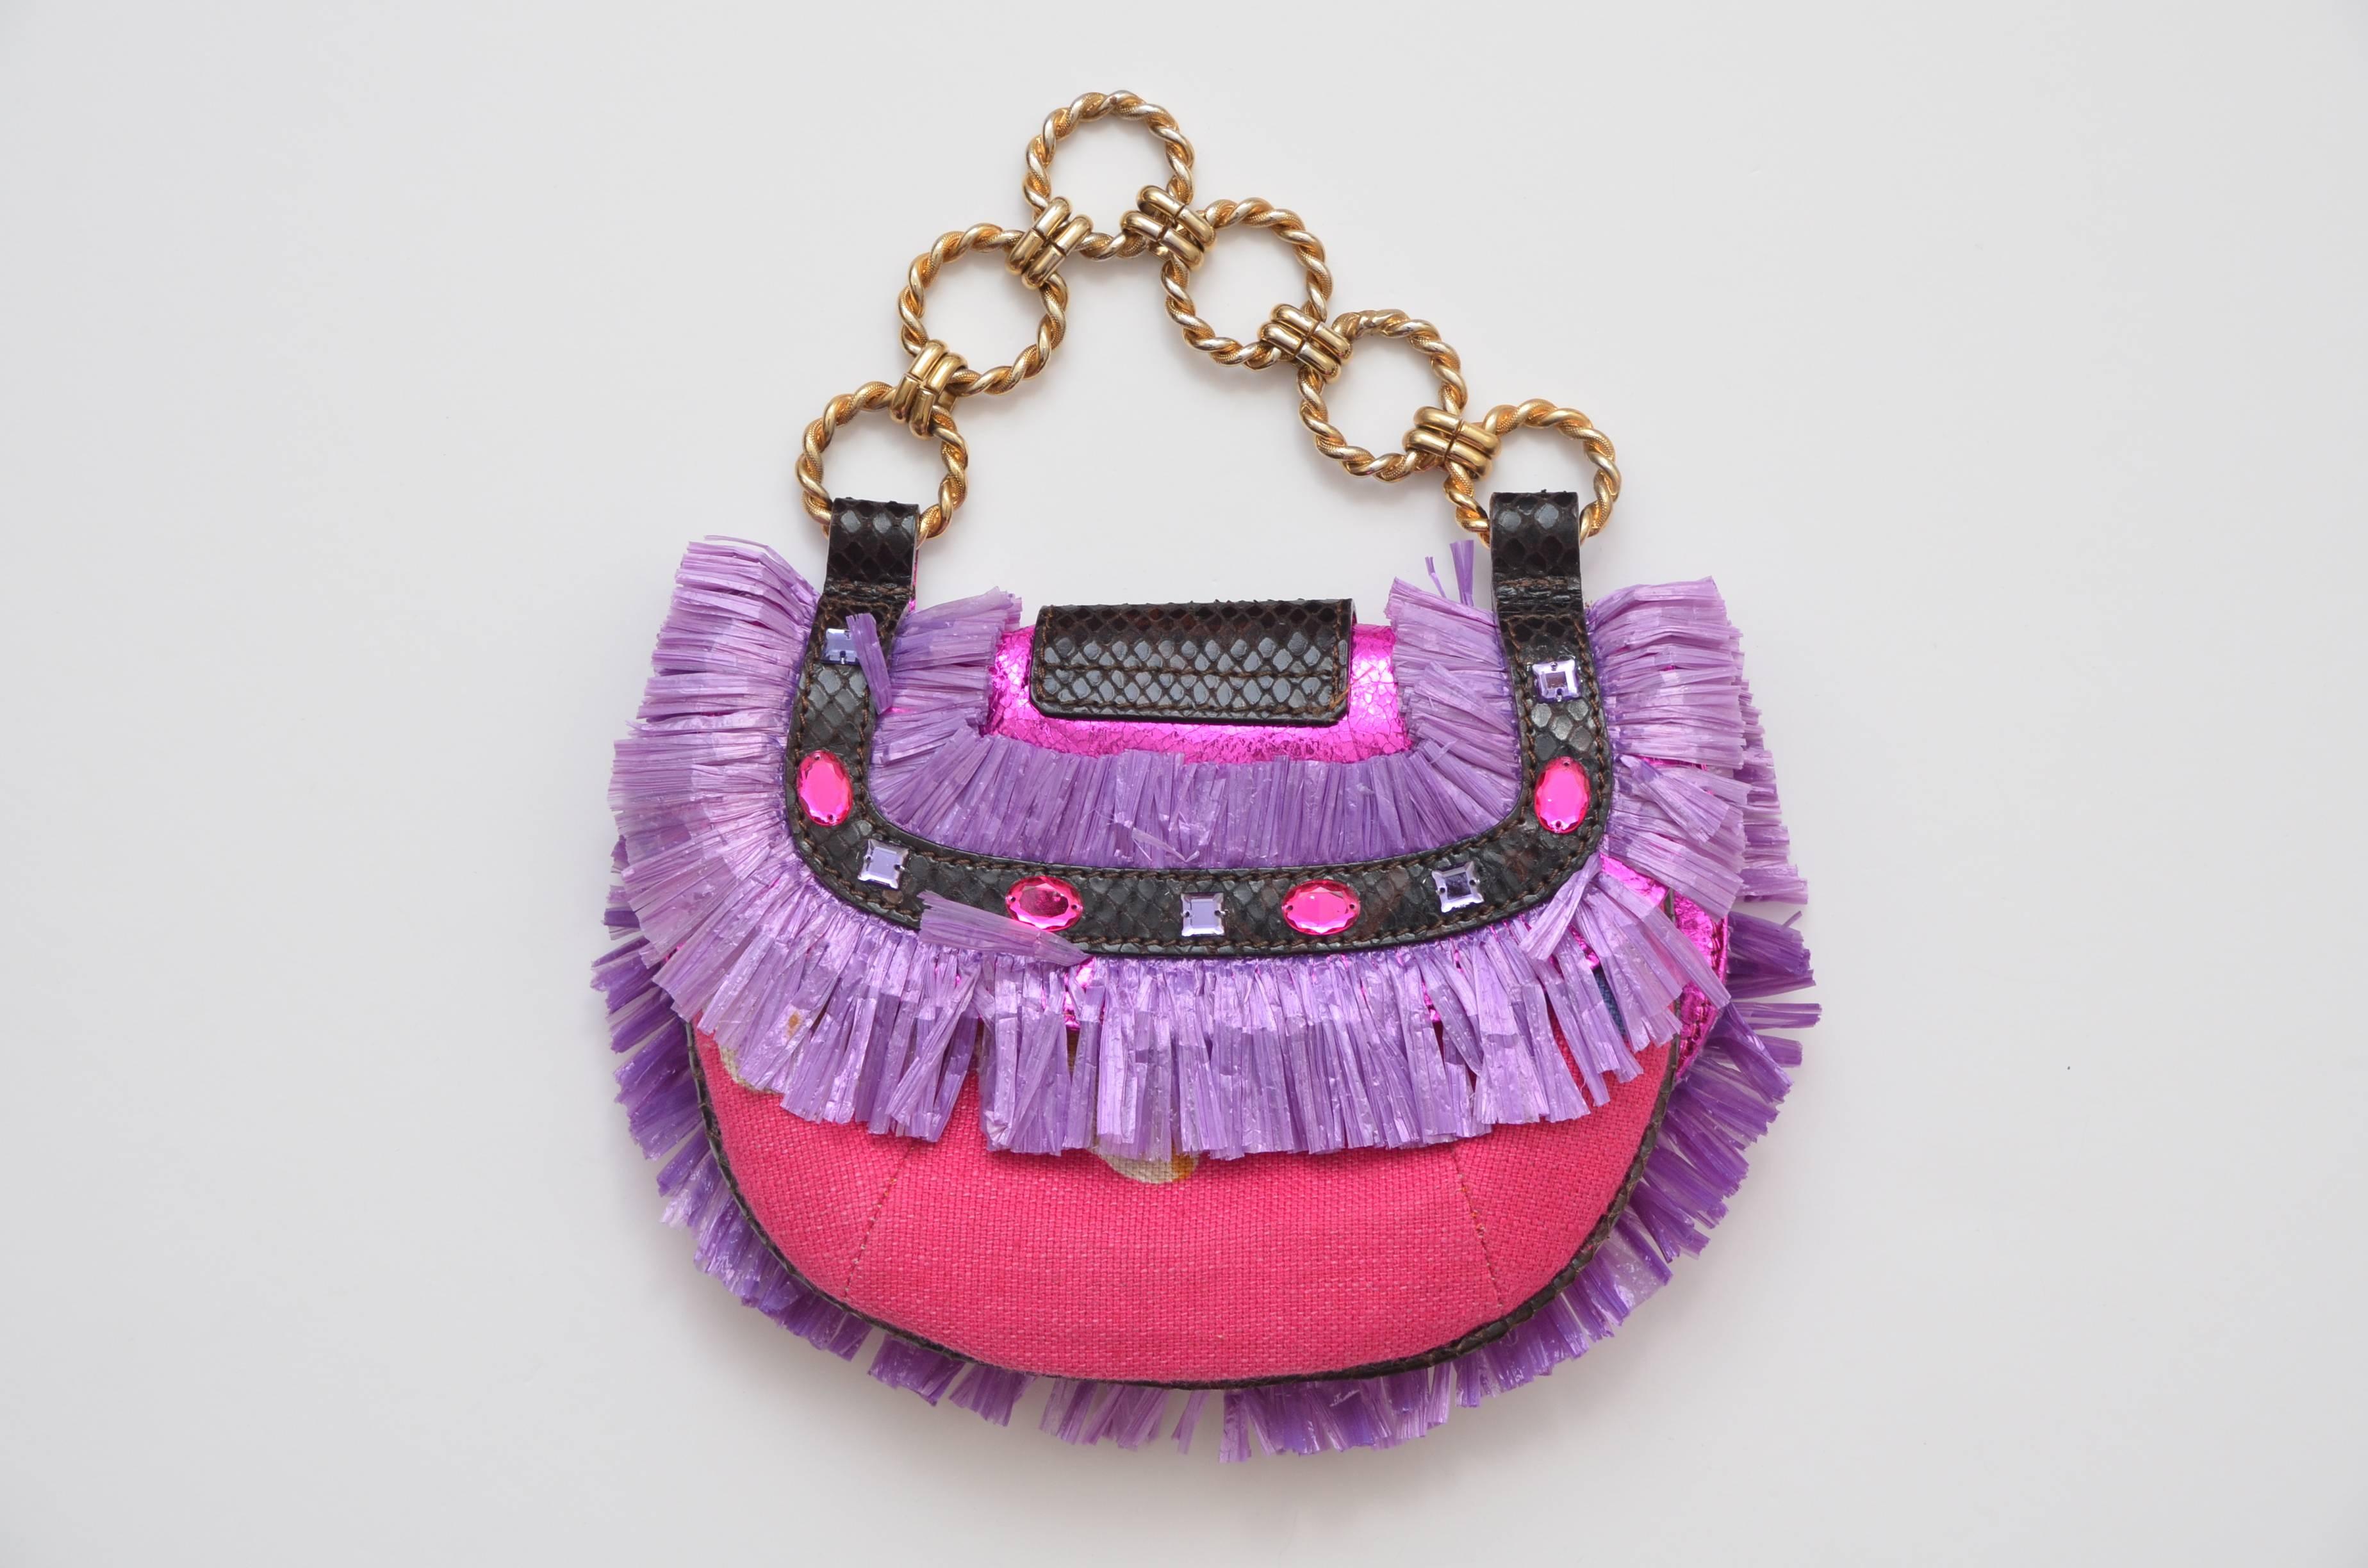 Super cute mini D&G Dolce Gabbana straw handbag.
Mixed colors of fabric printed , metallic fuchsia straw  ,purple,dark brown and embellishments.
Excellent mint condition.
Made in Italy.
Snap closure.
So many details on this mini purse.
Approximate